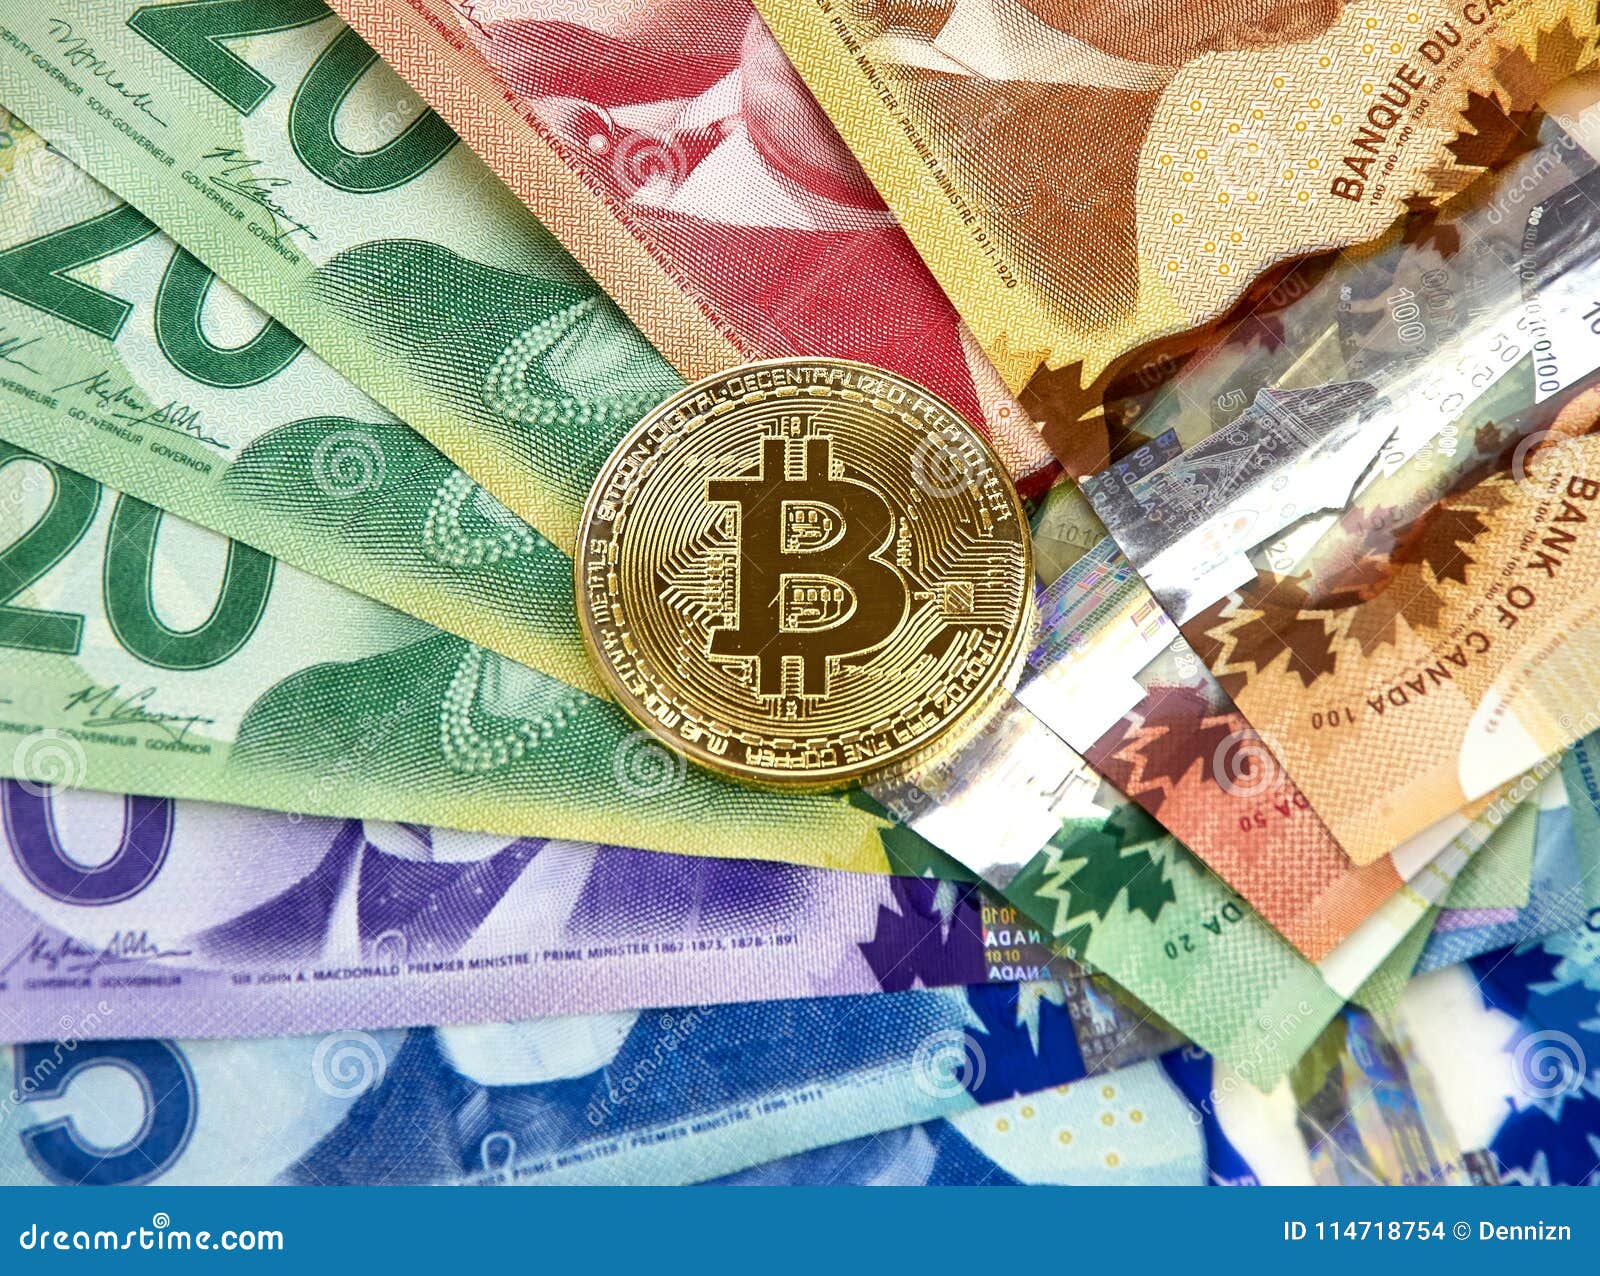 what is bitcoin worth today in canadian dollars